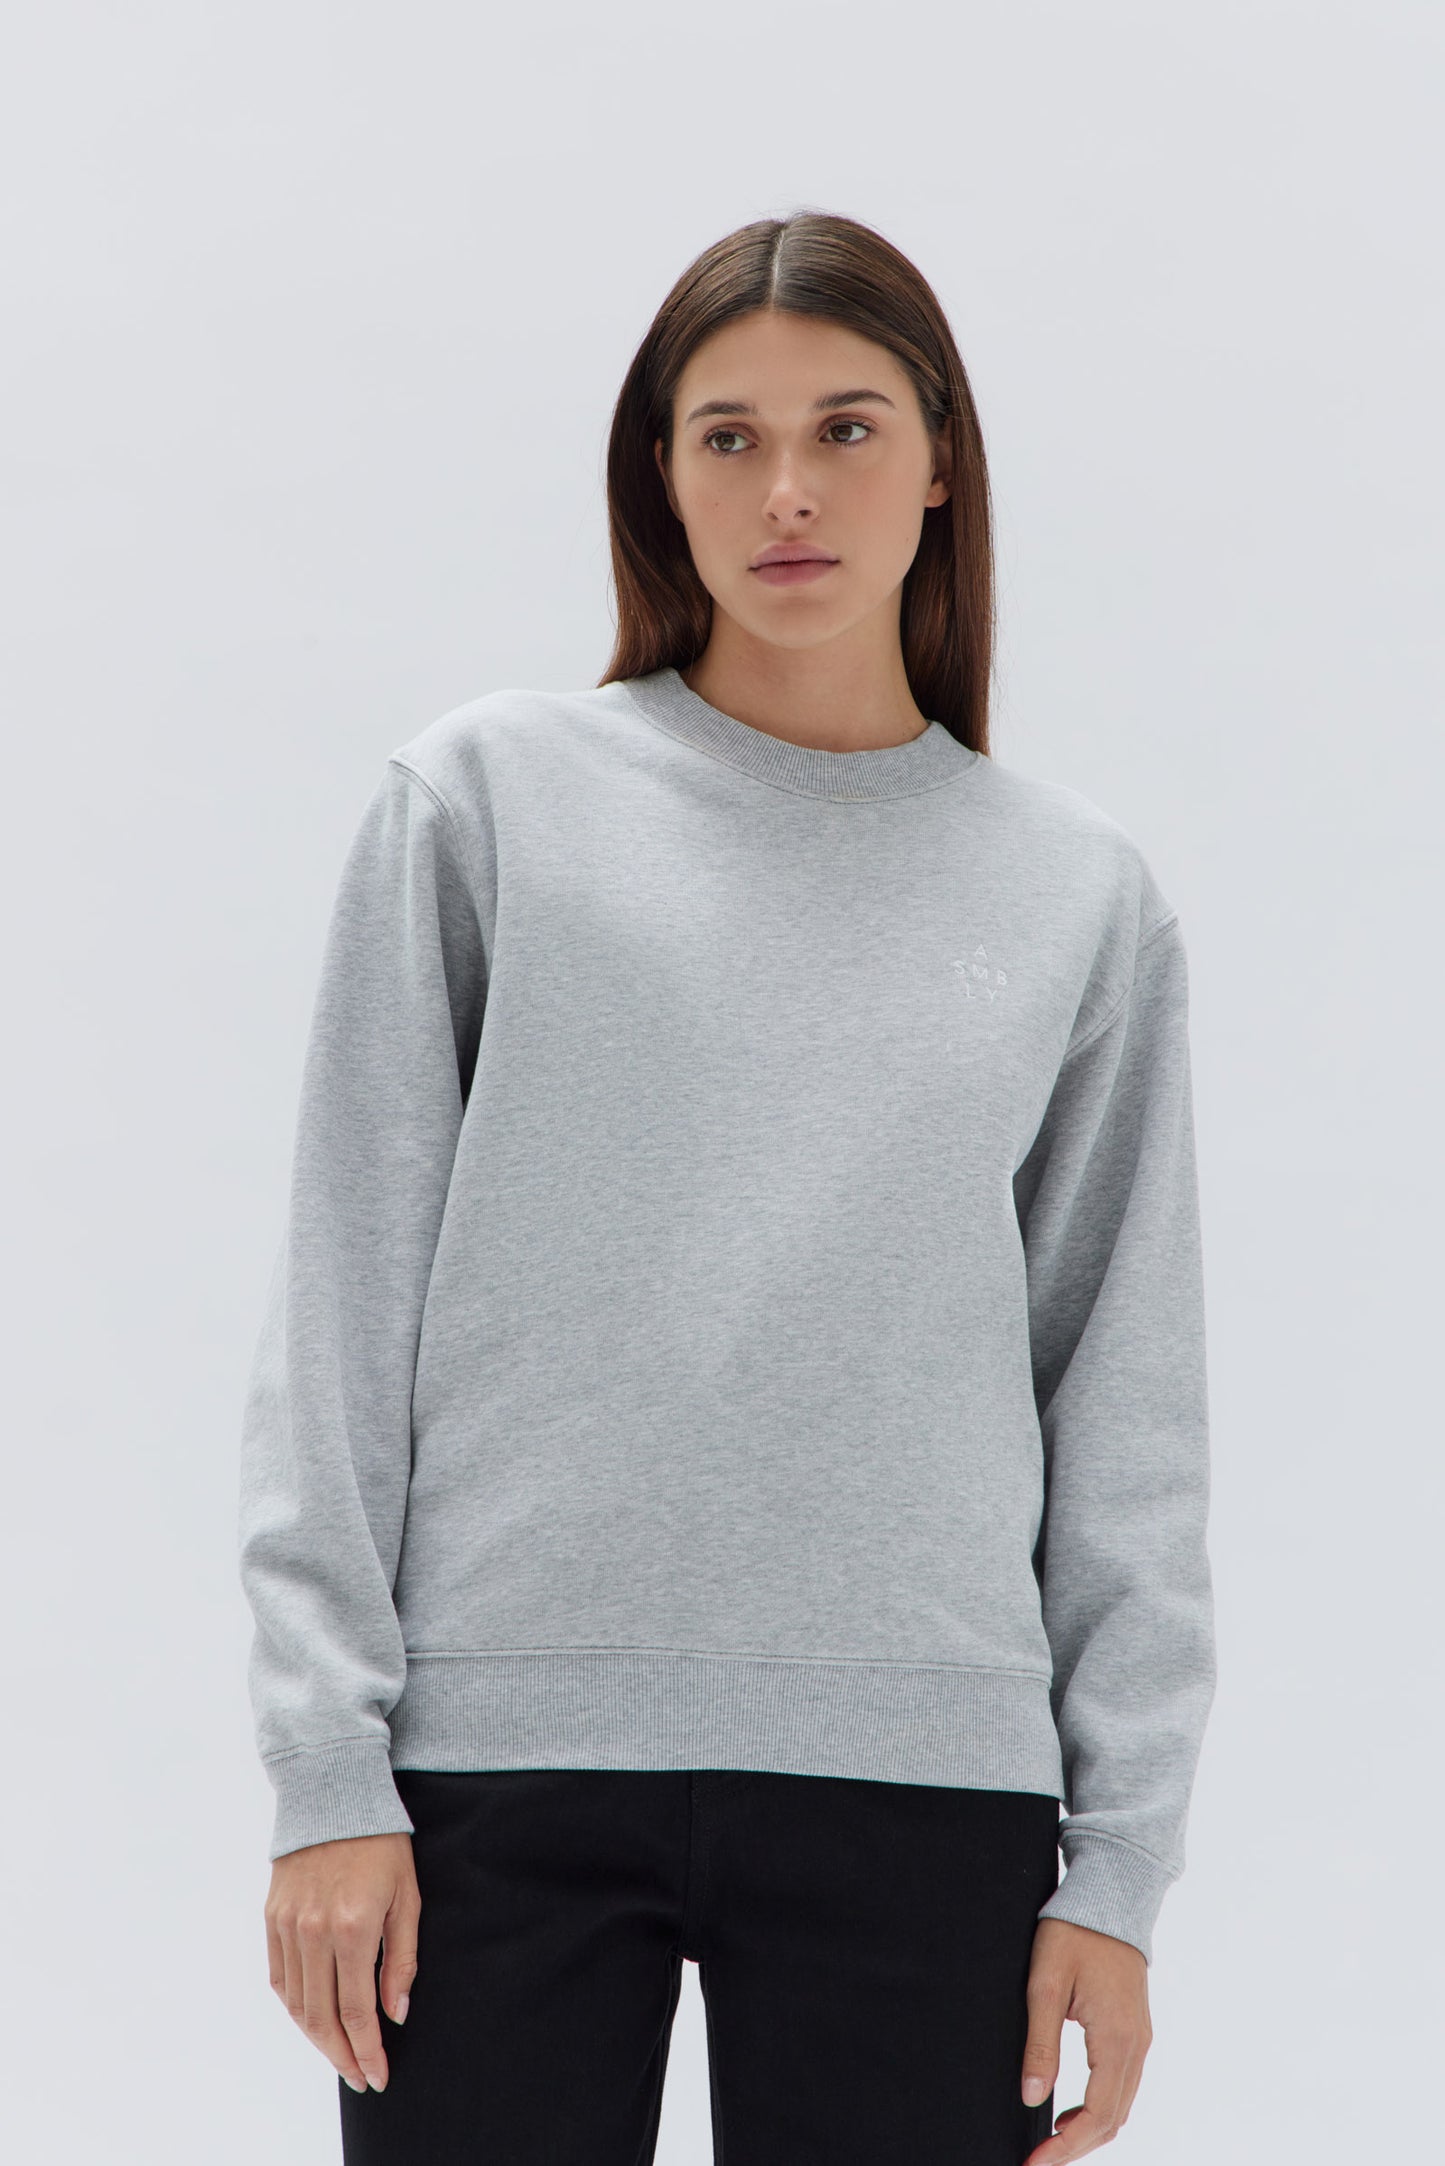 ASSEMBLY LABEL // Womens Stacked Fleece GREY MARLE